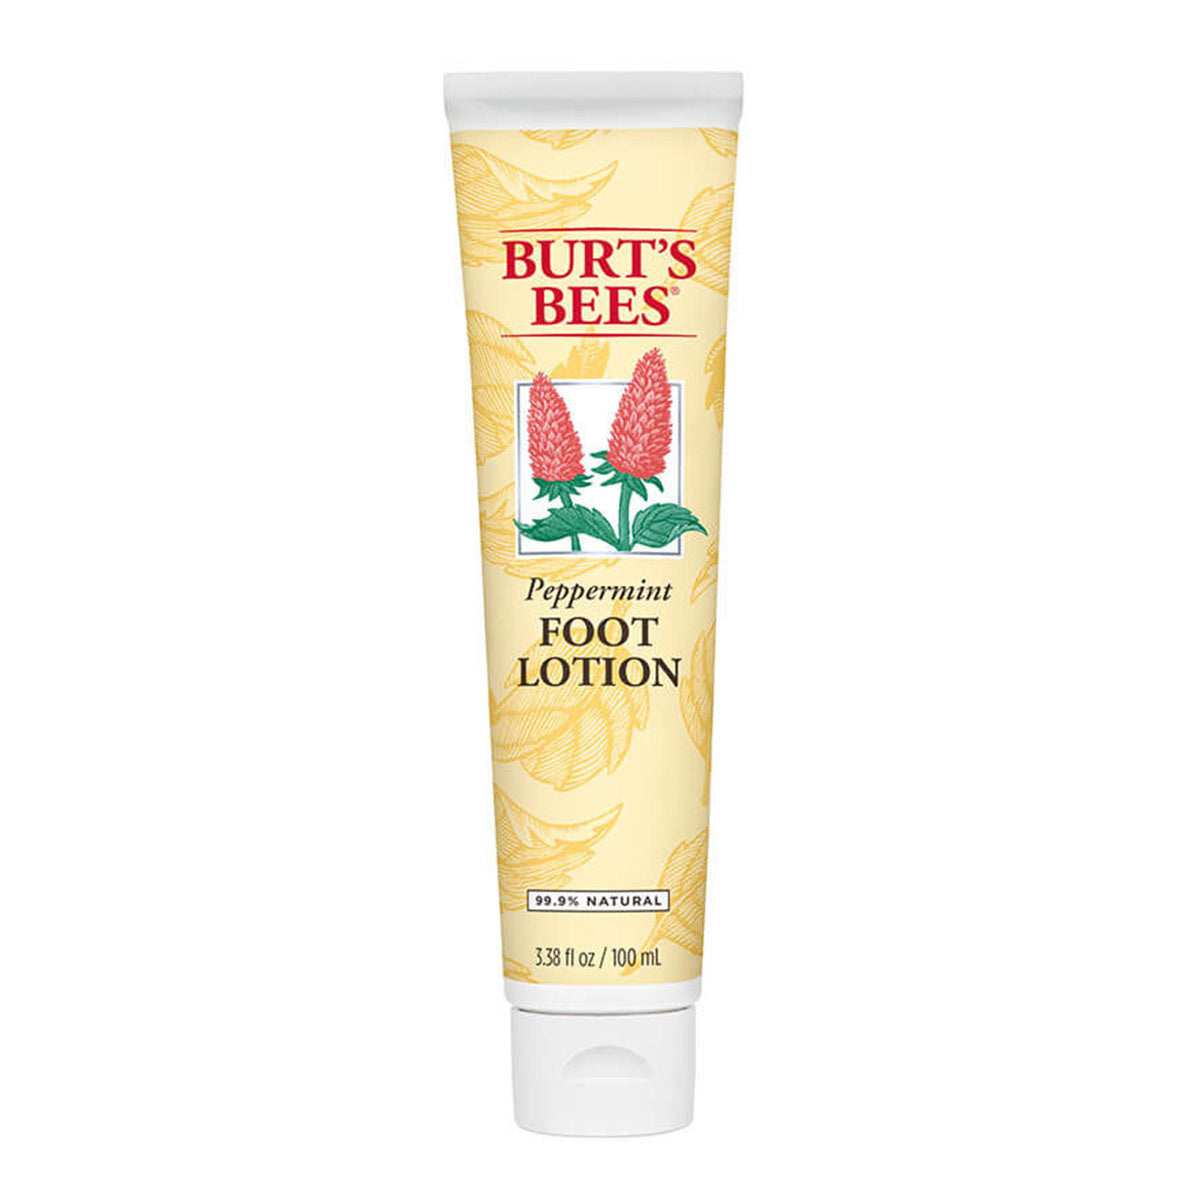 Primary image of Peppermint Foot Lotion